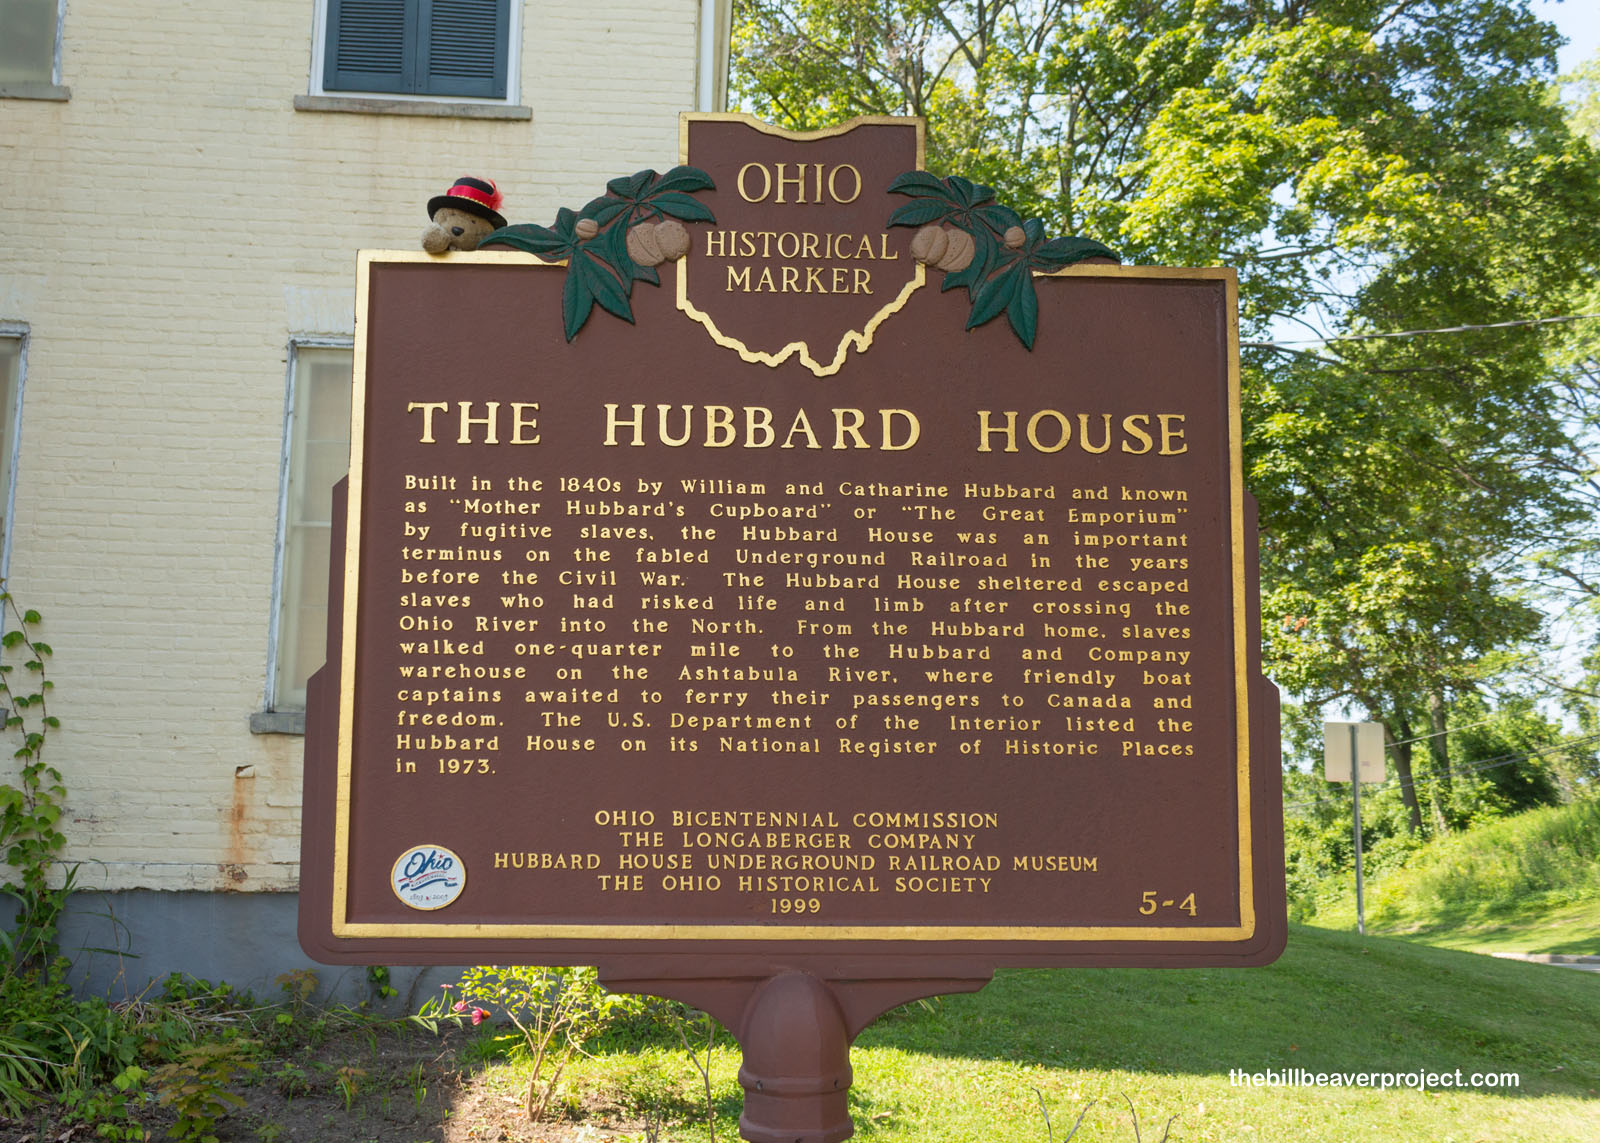 The Hubbard House